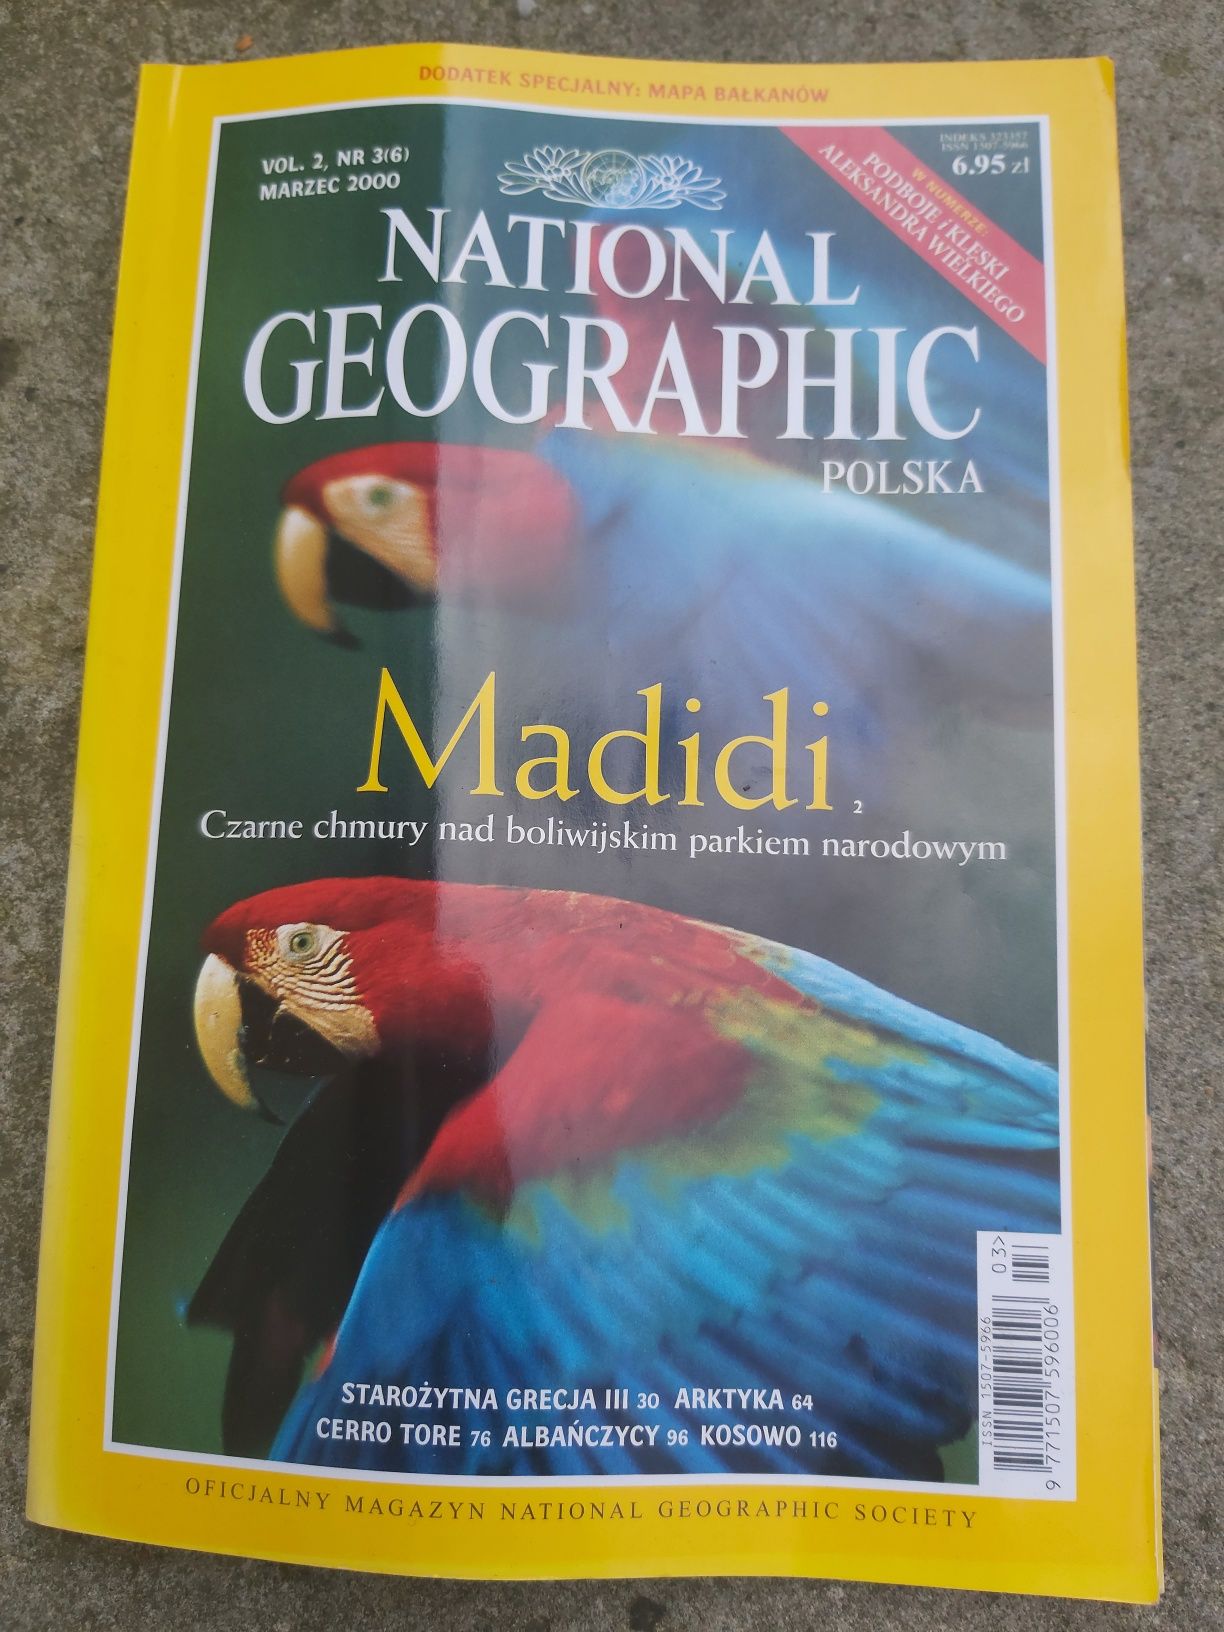 Magazyn National Geographic 03/00